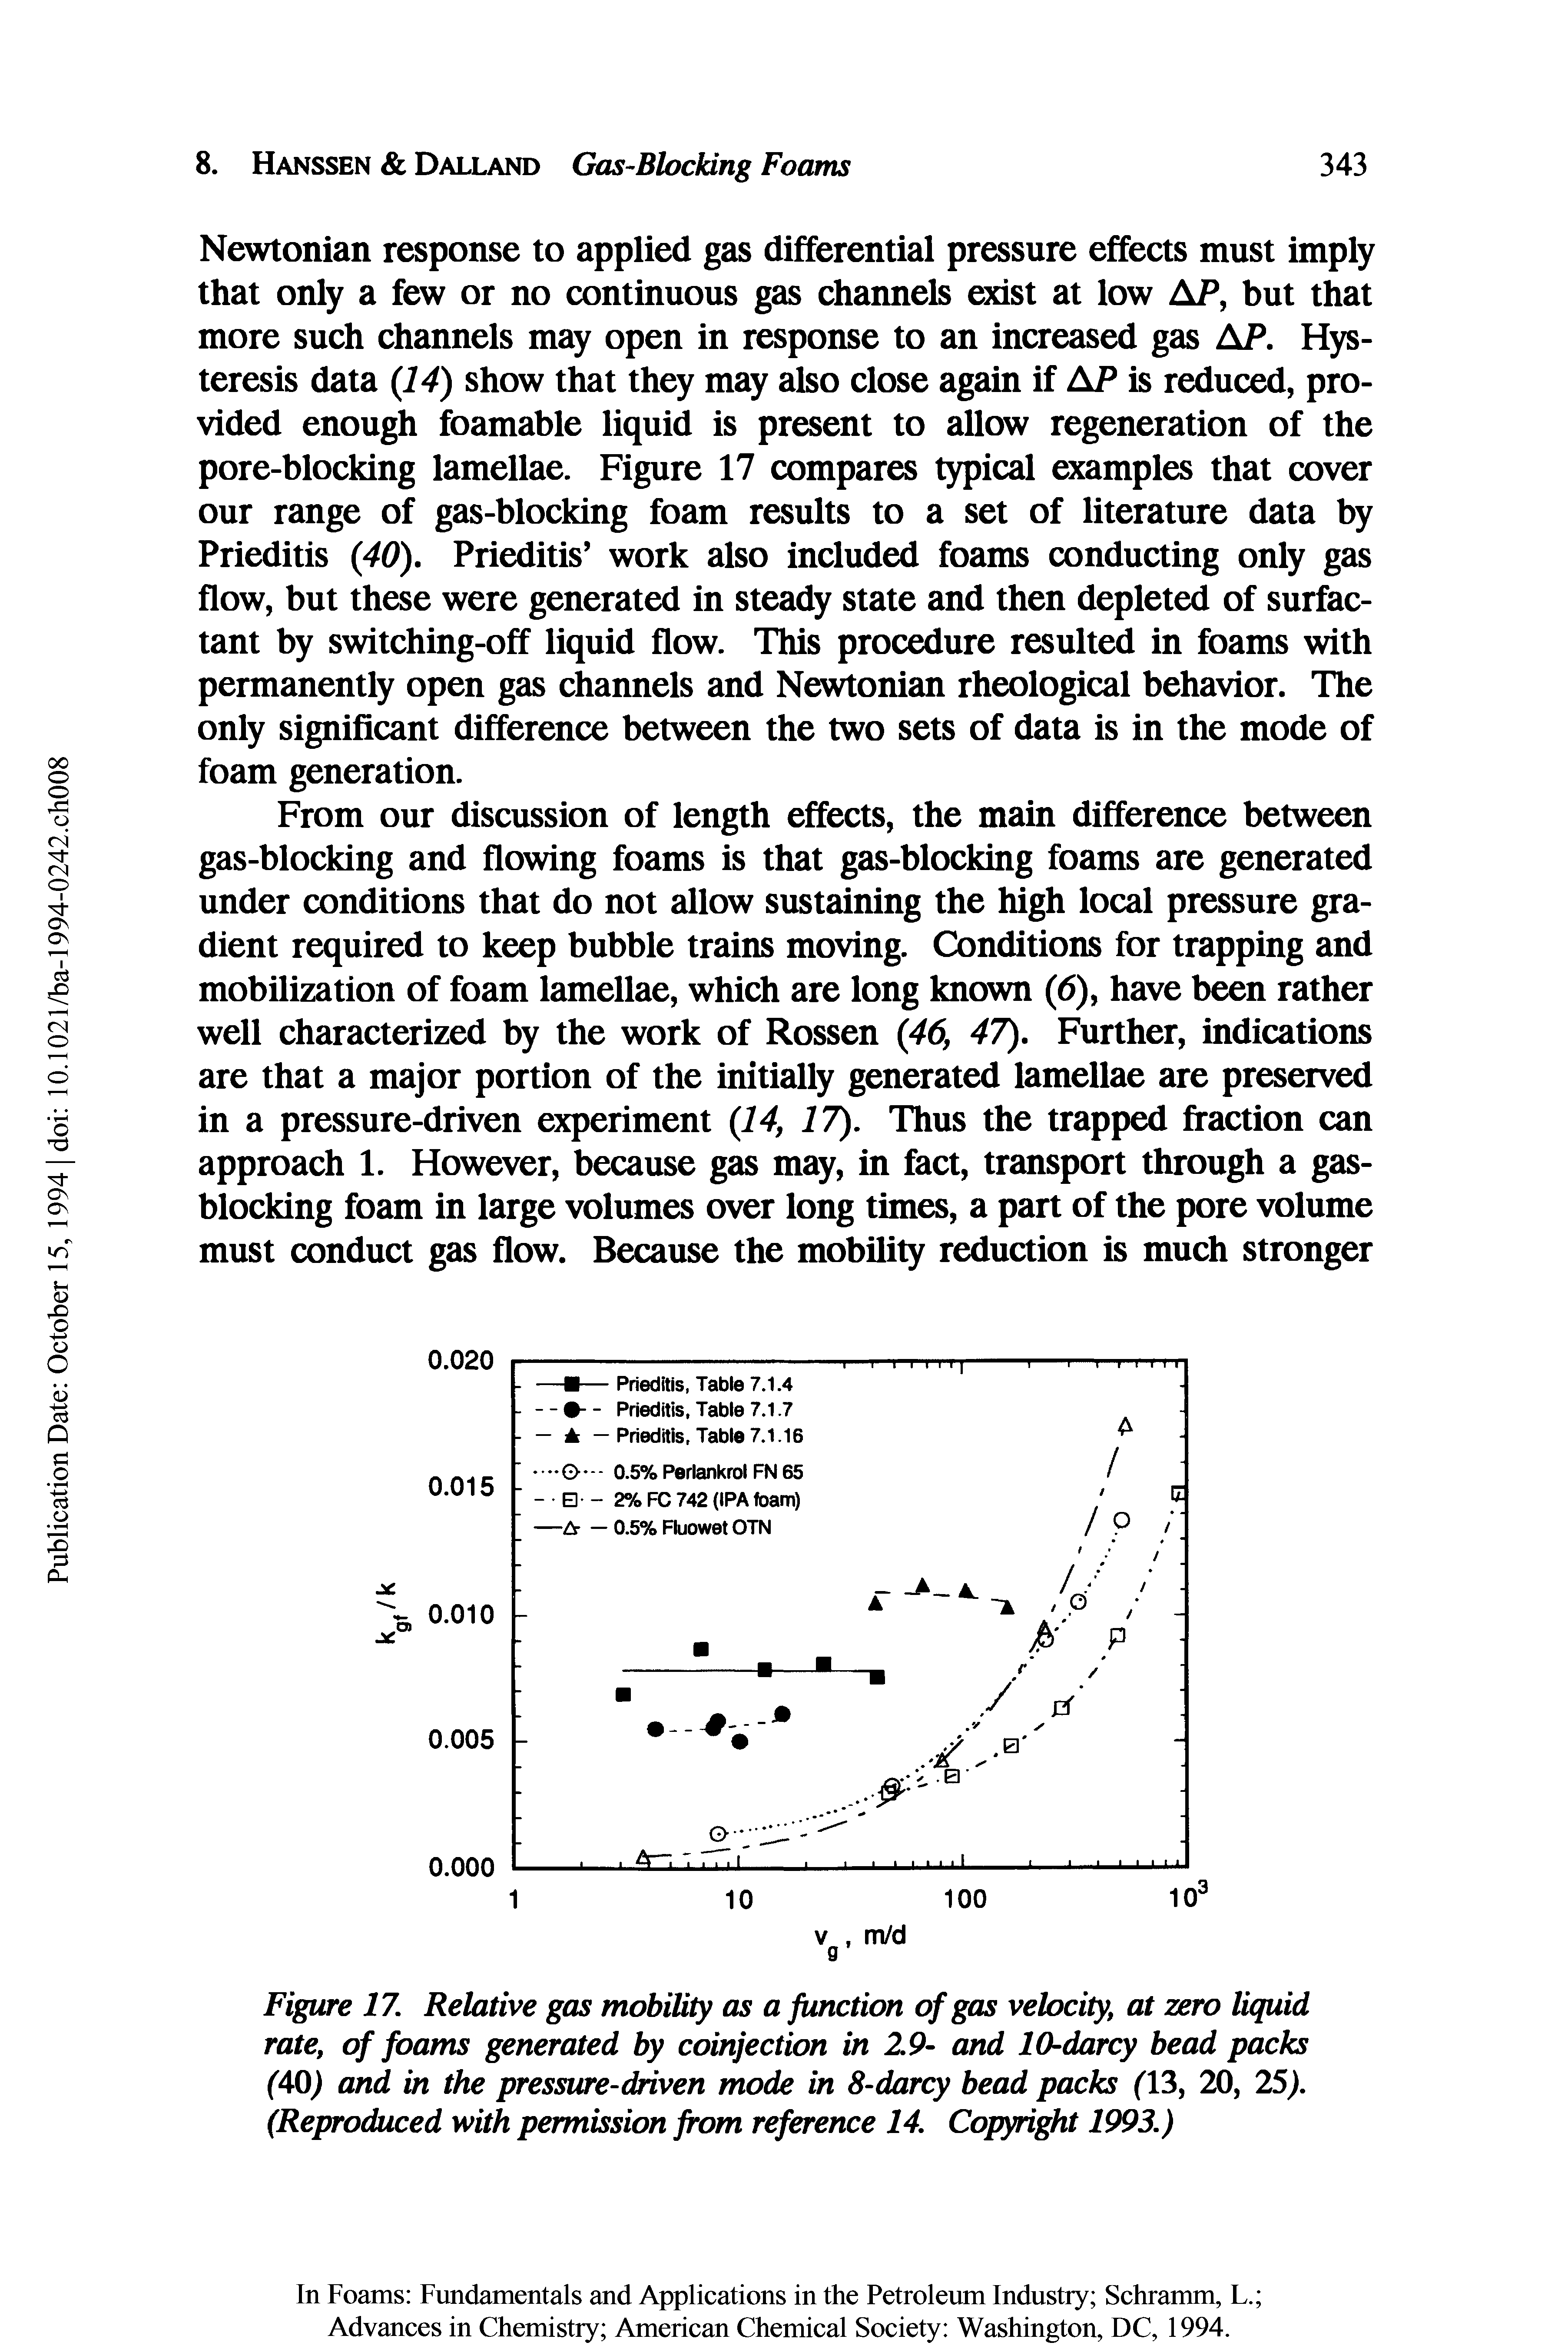 Figure 17. Relative gas mobility as a function of gas velocity at zero liquid rate, of foams generated by coinjection in 29- and 10-darcy bead packs (40) and in the pressure-driven mode in 8-darcy bead packs ("13, 20, 25). (Reproduced with permission from reference 14. Copyright 1993.)...